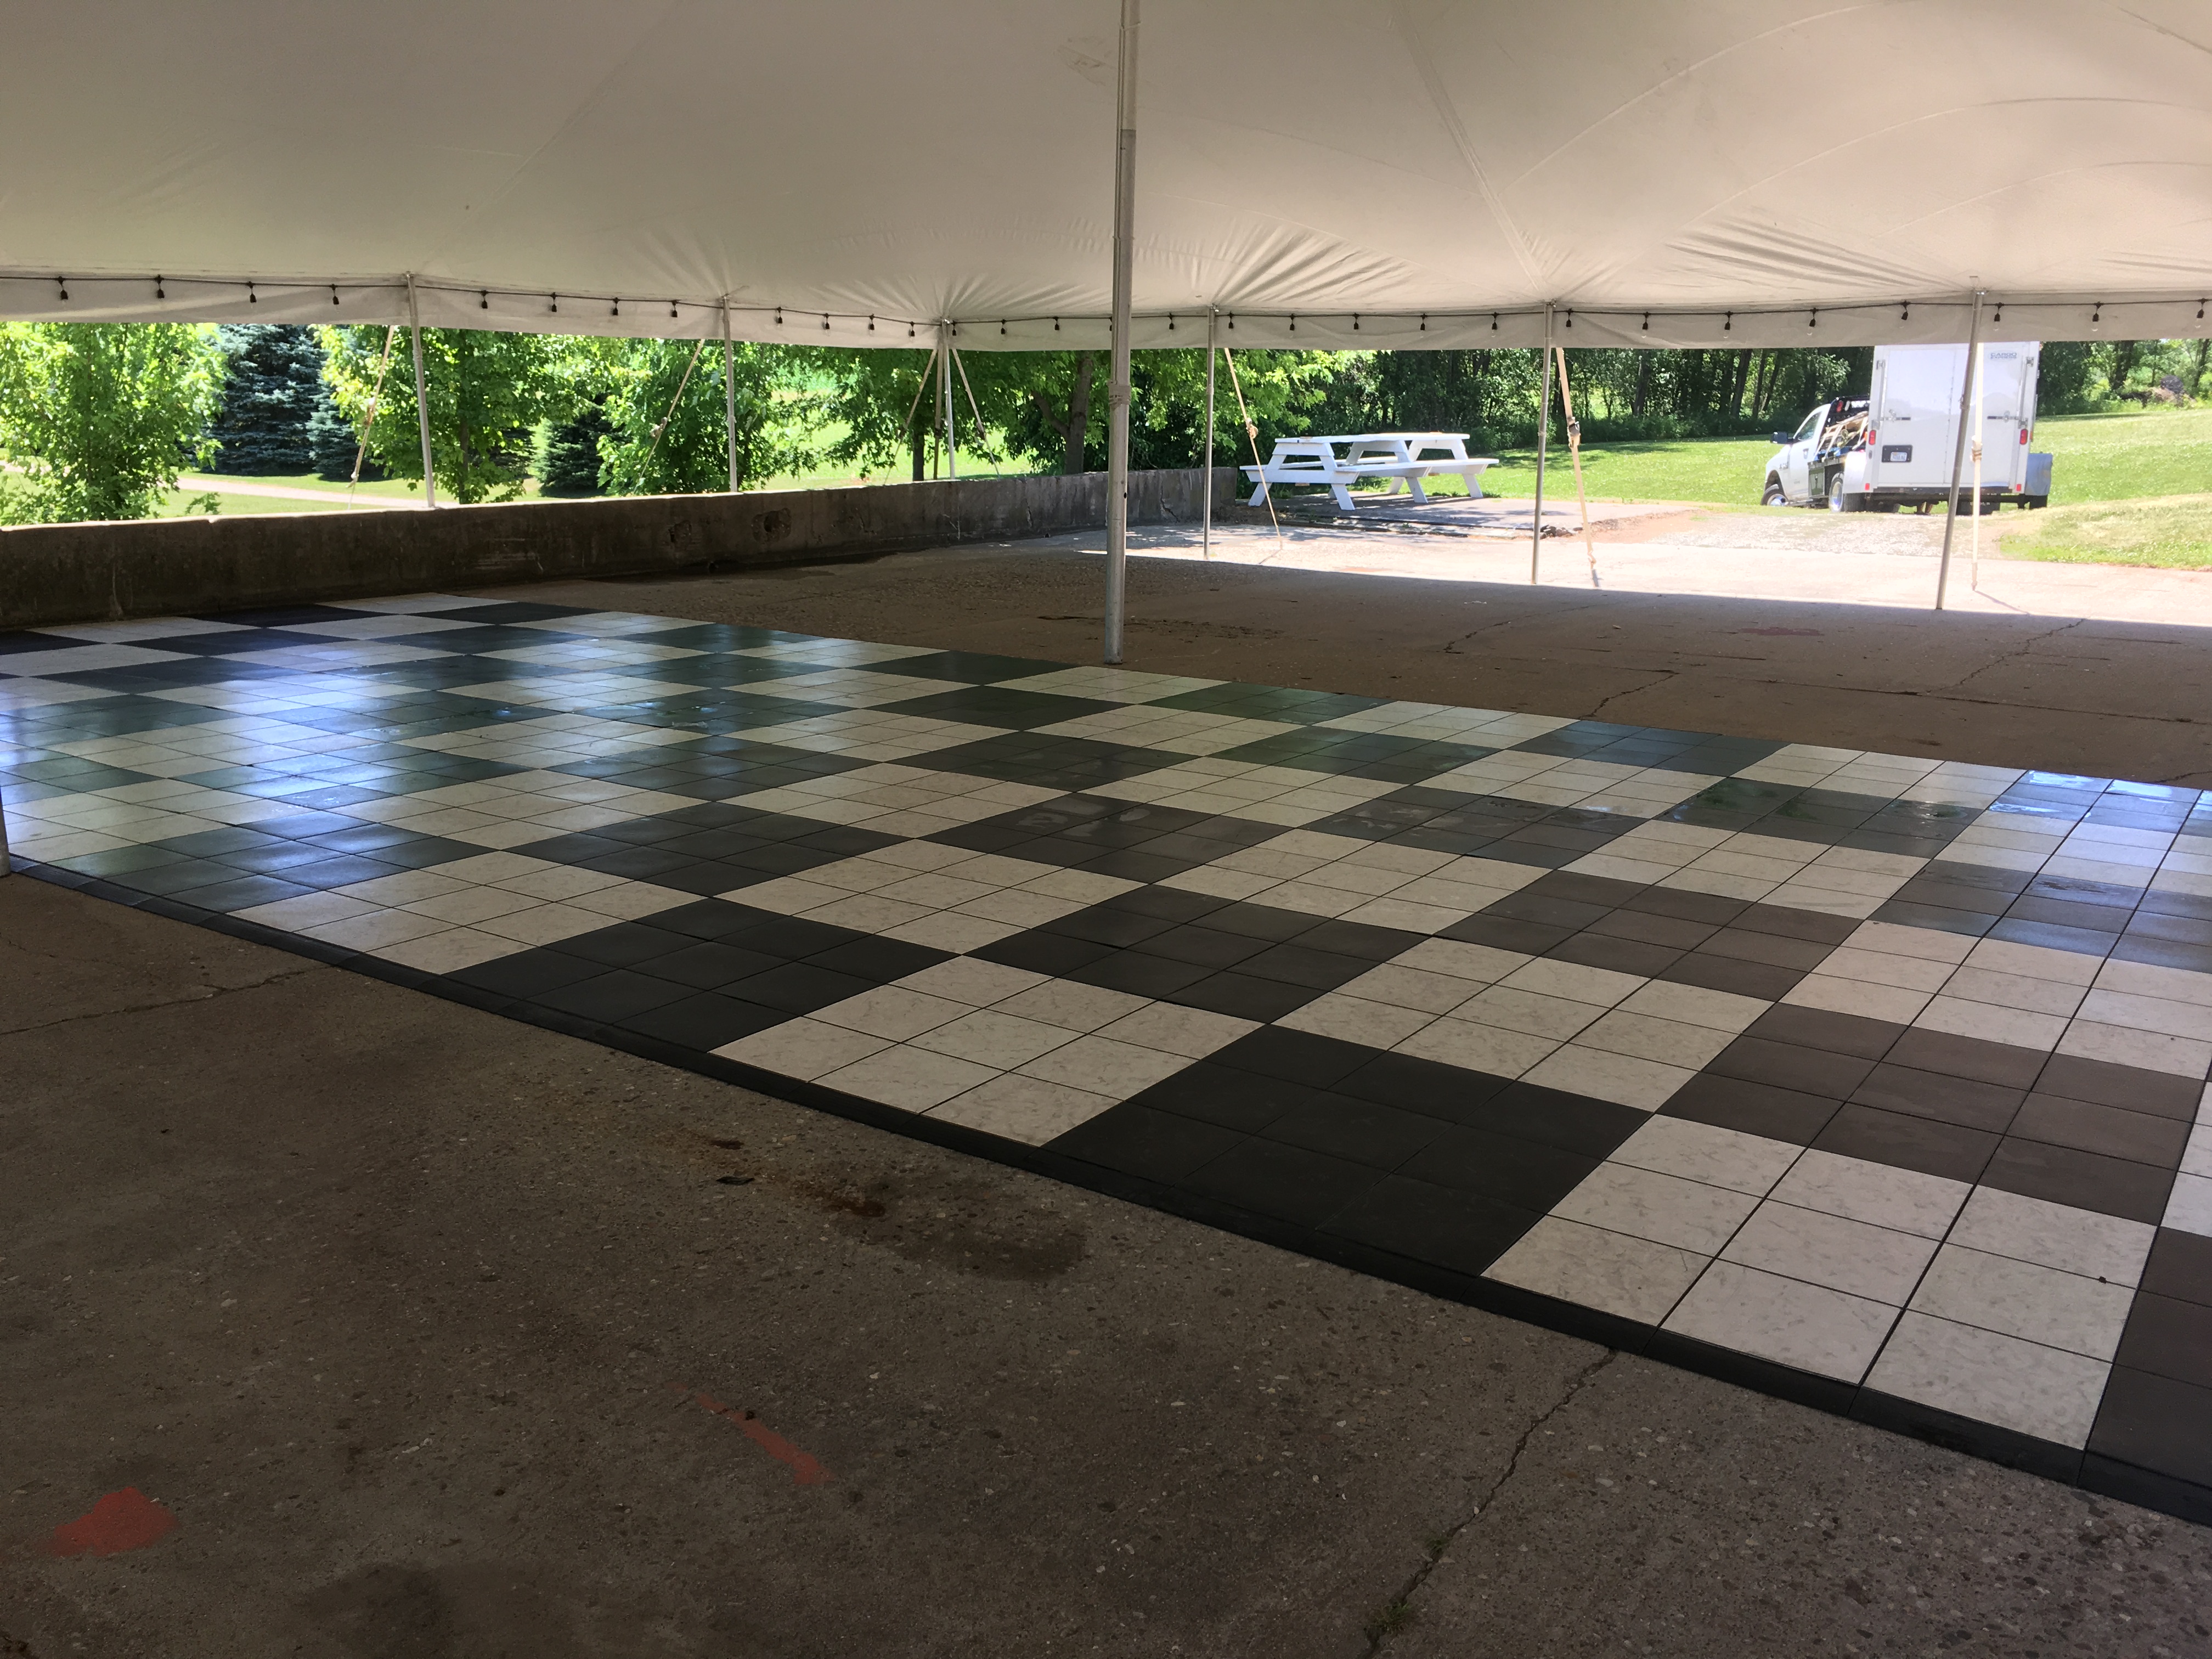 Dance flooring under 40'x60' Rope and Pole Tent for an outdoor wedding reception in Columbus Junction, IA